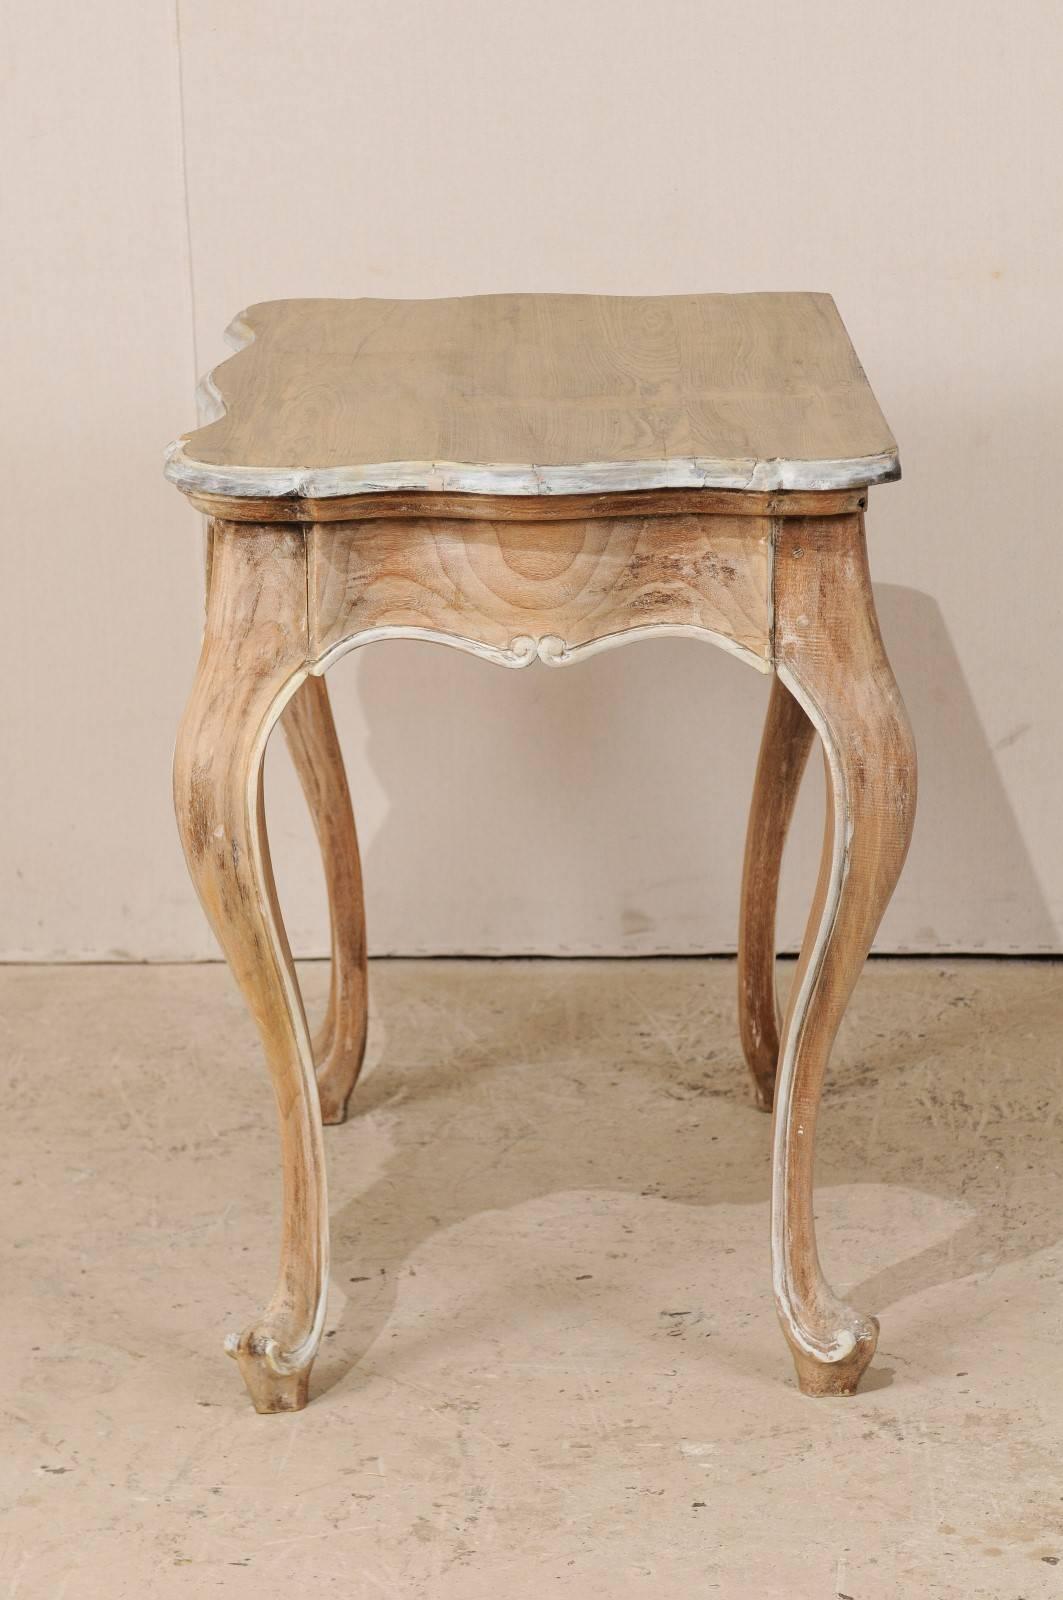 20th Century Lovely Brazilian Accent Table of Natural Wood with Painted Trim & Cabriole Legs